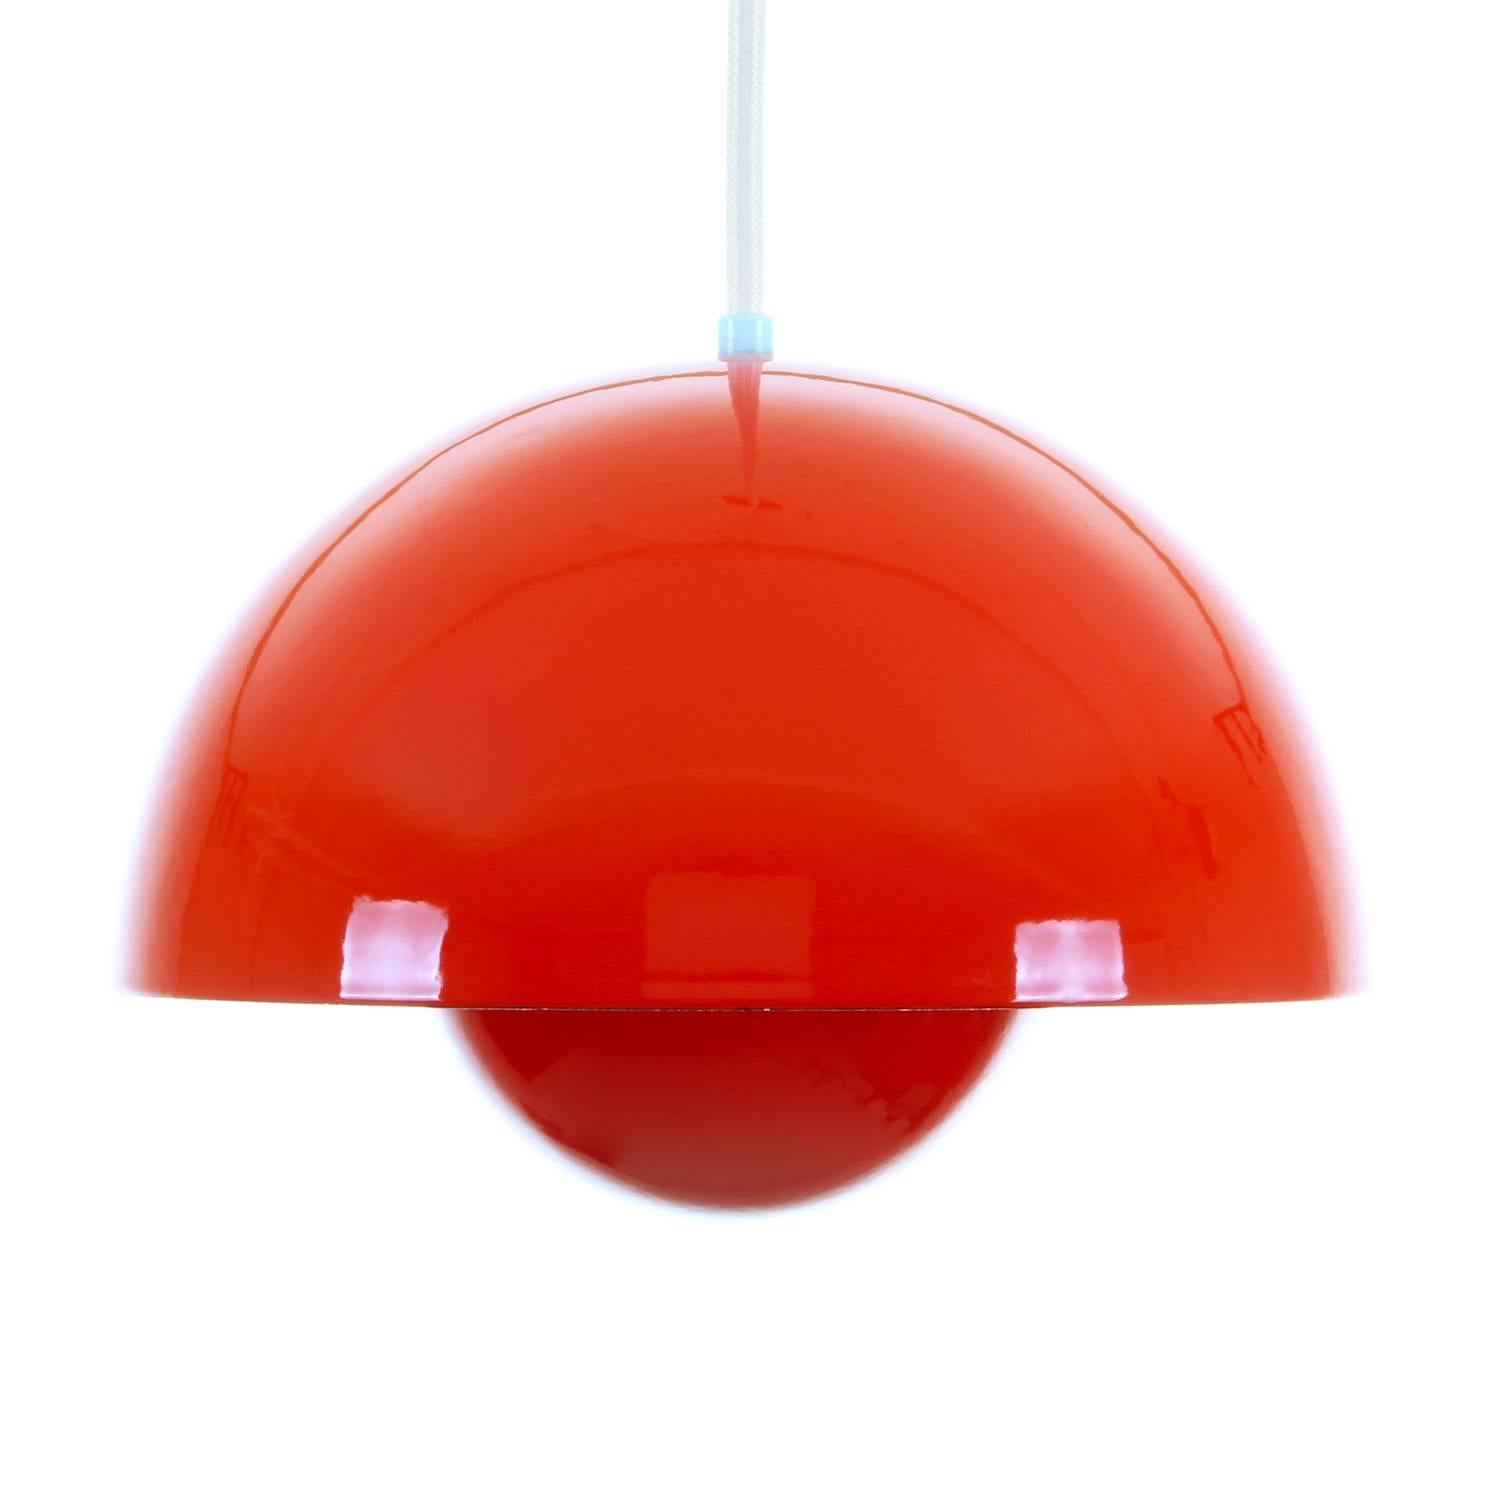 Flowerpot, dark orange enameled pendant by Verner Panton in 1968 and produced by Louis Poulsen. Iconic 1960s lighting design in excellent vintage condition!

We have six pieces in stock!

Flowerpot is a stunning light, simple and organic, with an